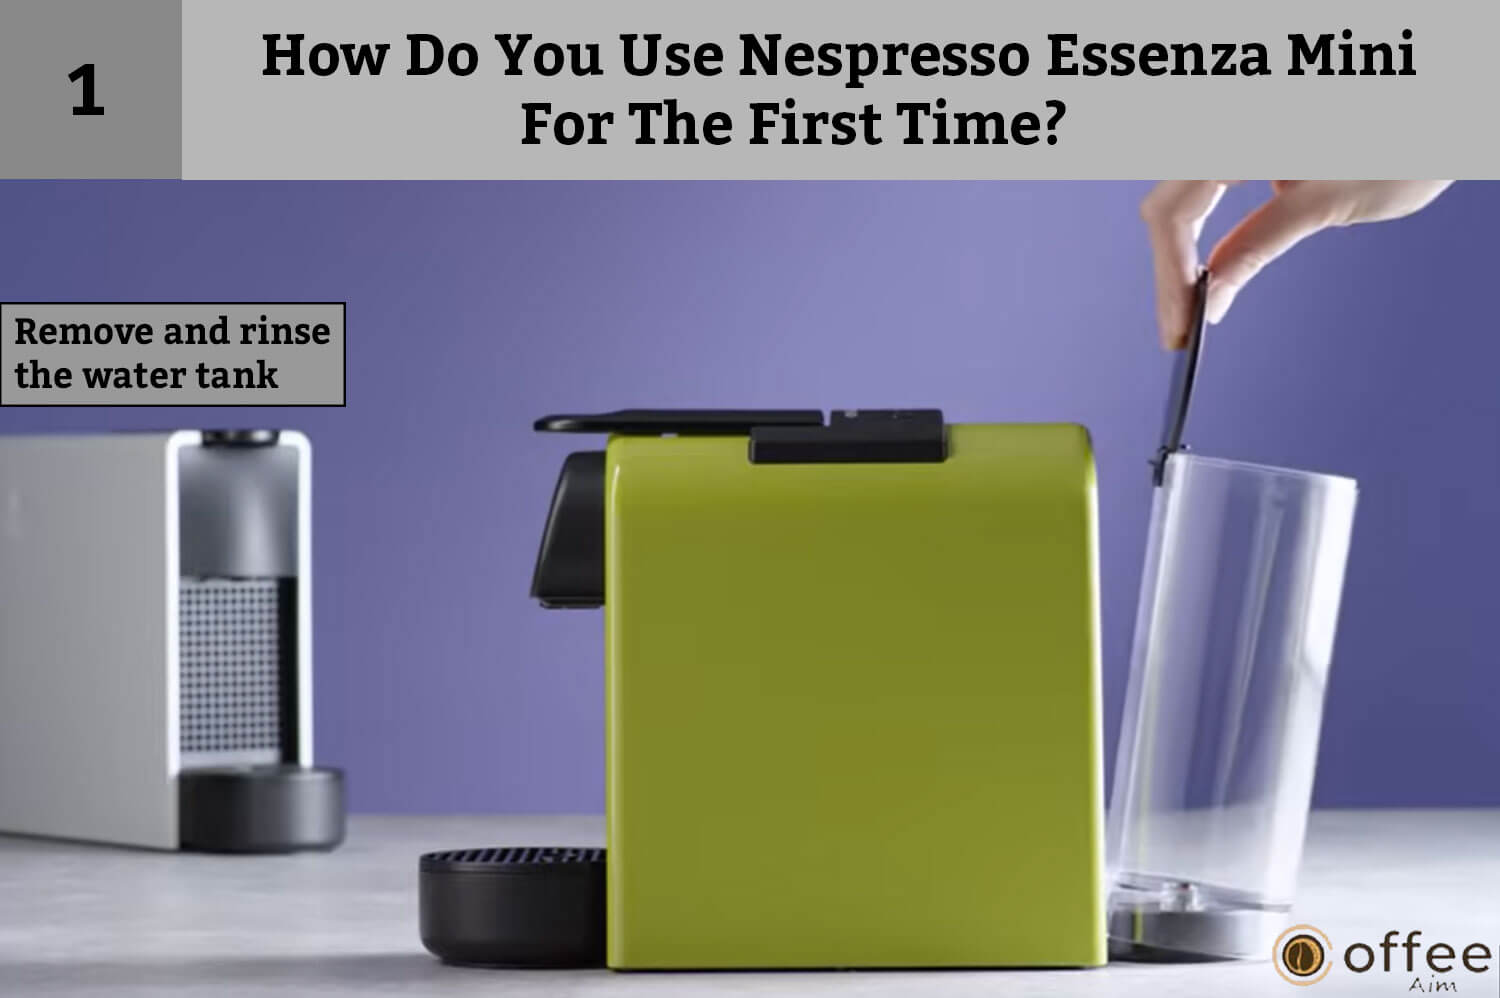 The first instruction of How Do You Use Nespresso Essenza Mini For The First Time? is Remove and rinse the water tank.